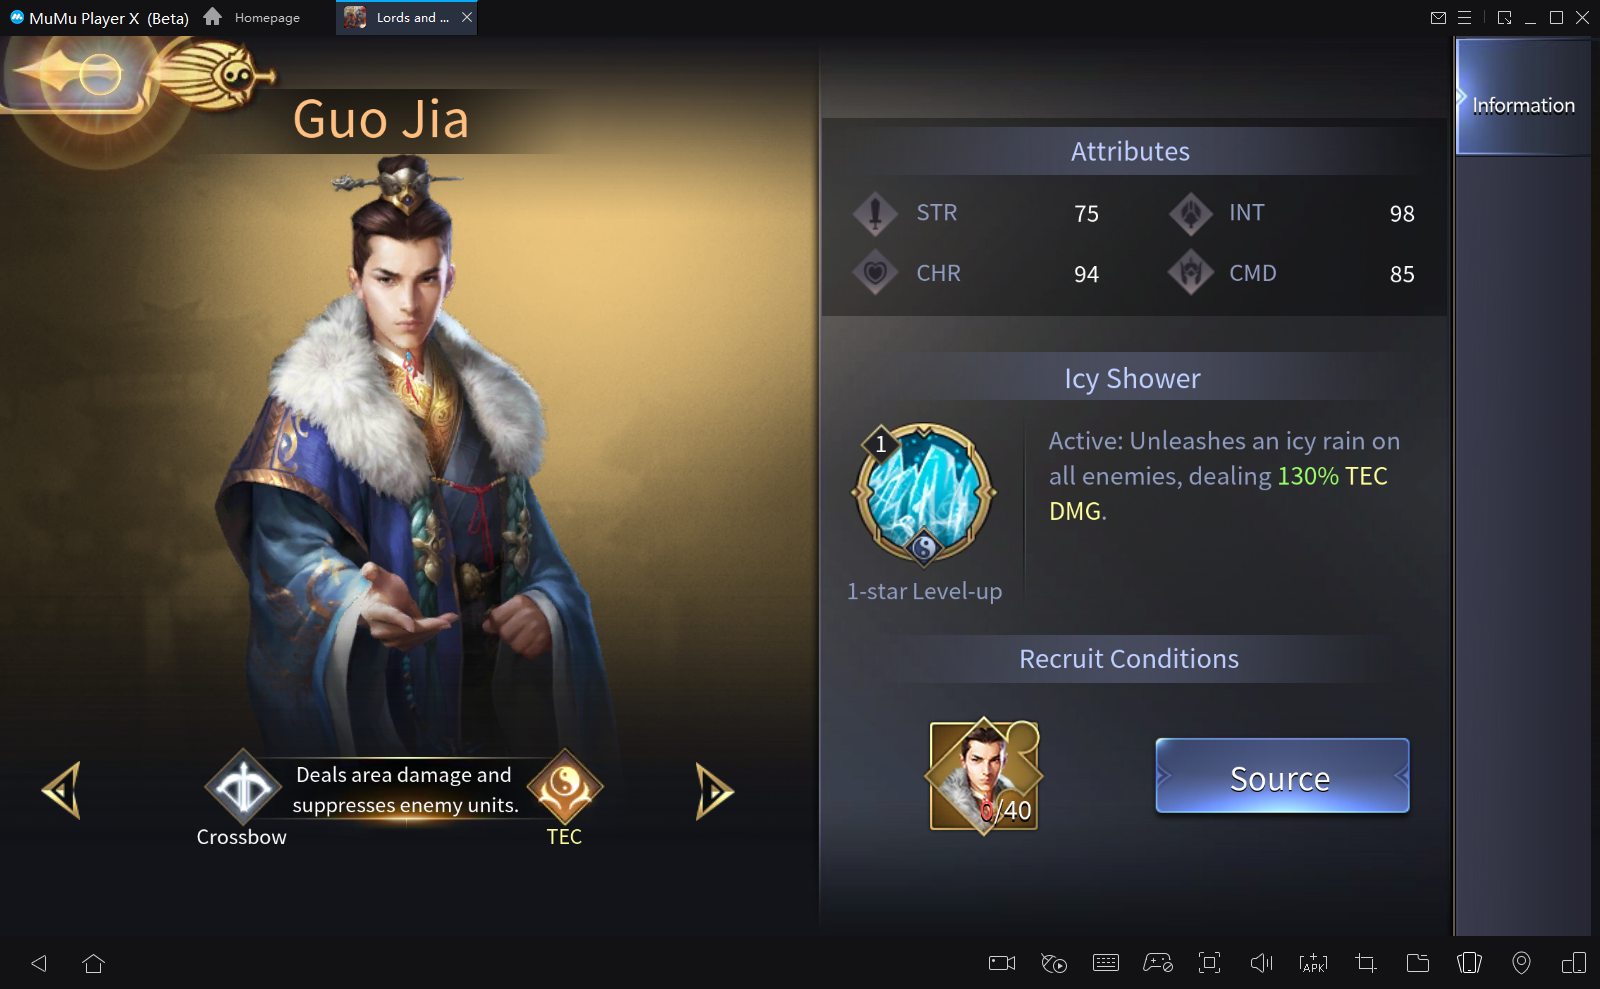  Lords and Tactics guojia